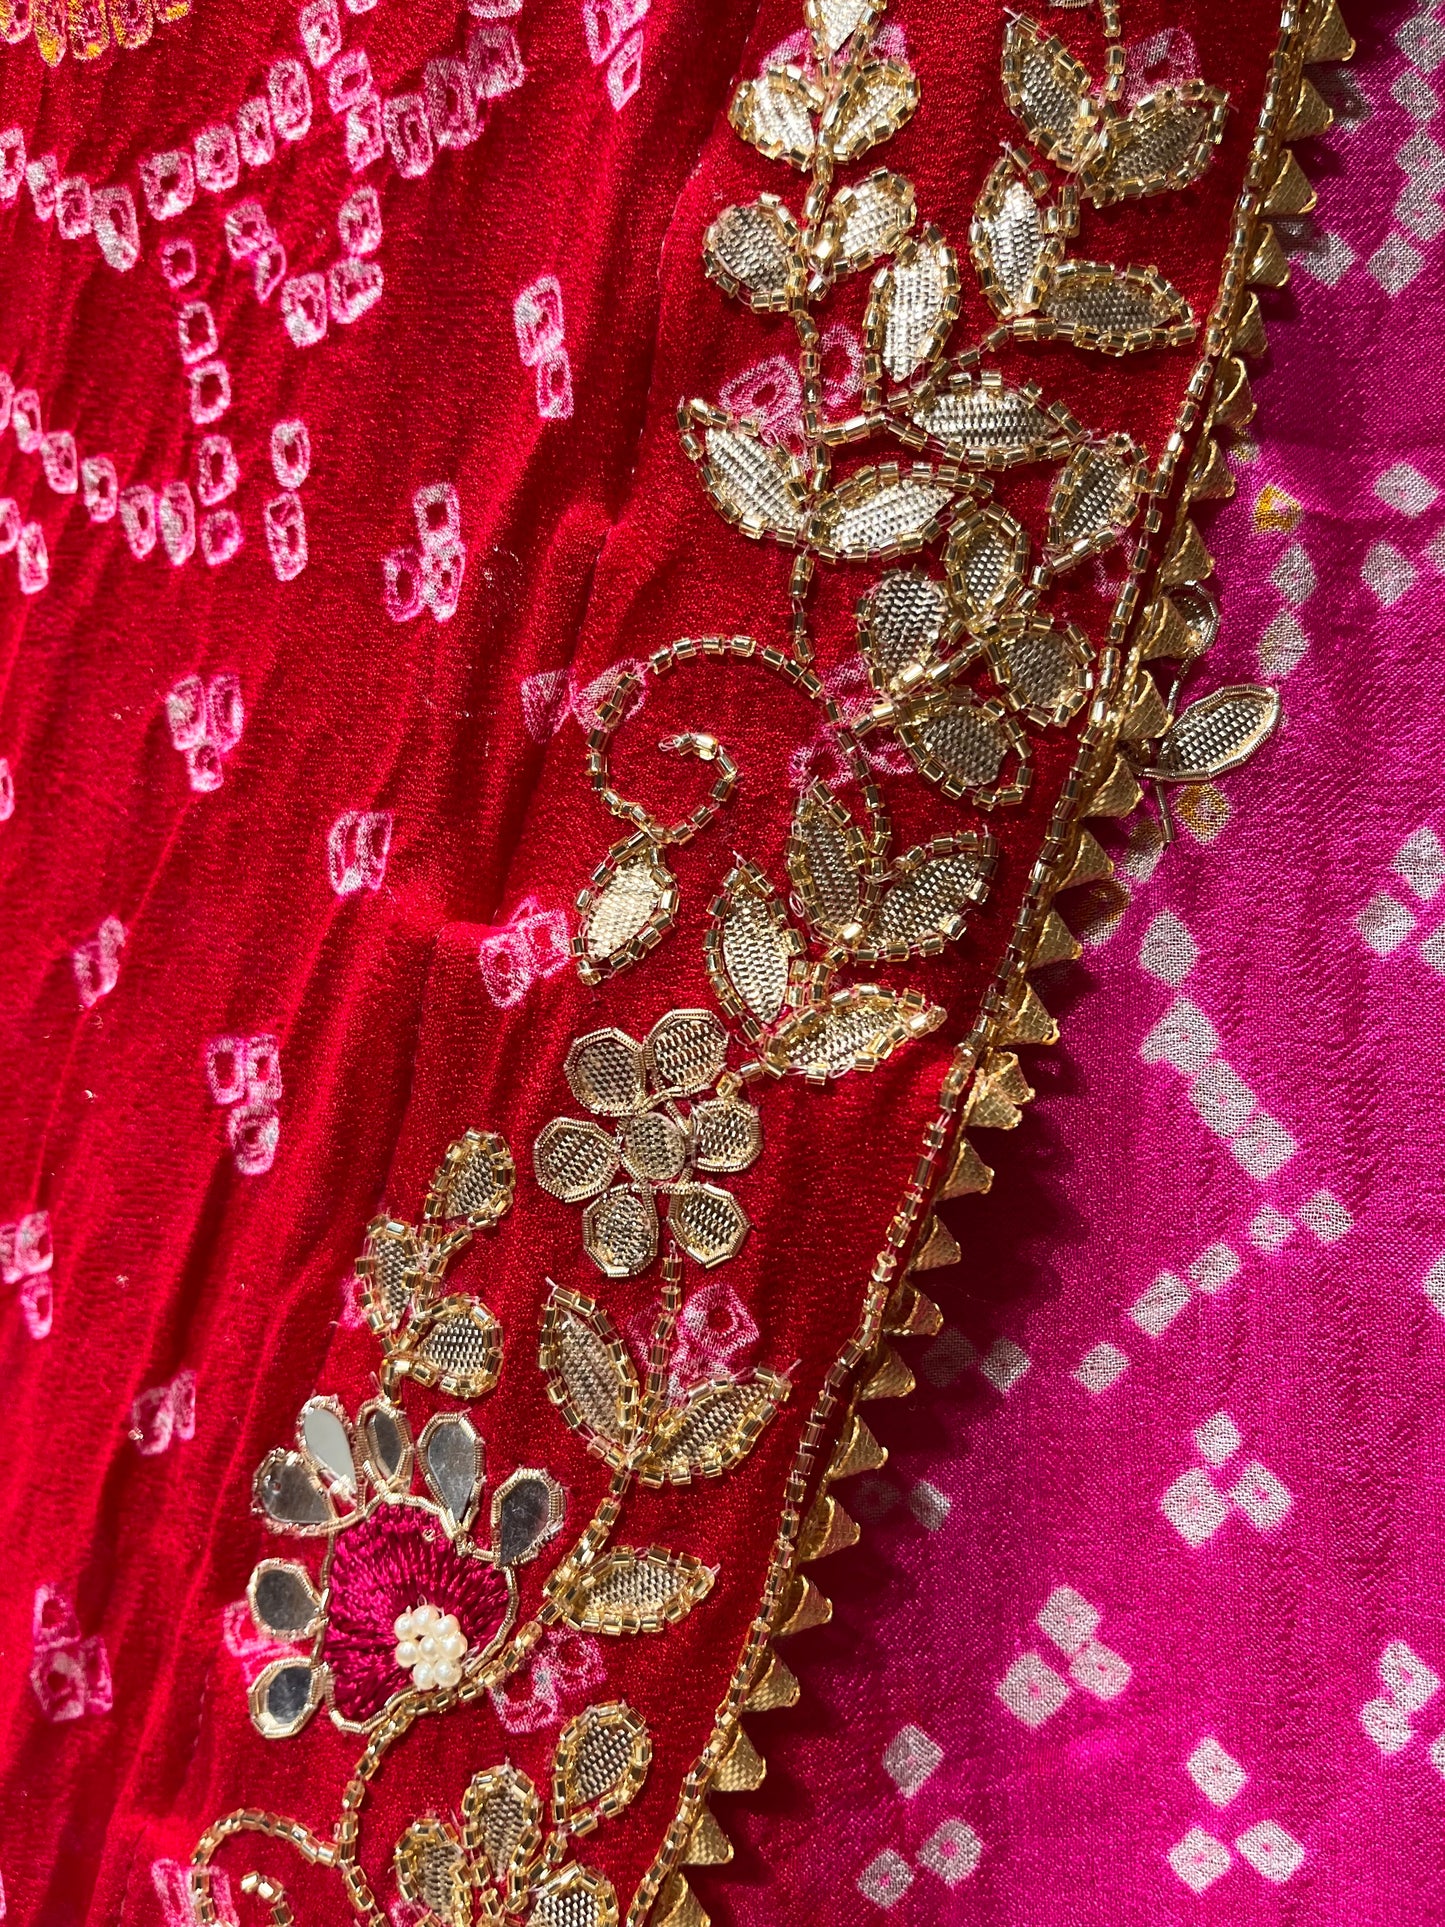 (DELIVERY IN 25 DAYS) PINK COLOUR BANDHEJ OJARIYA LEHENGA WITH UNSTITCHED BLOUSE EMBELLISHED WITH GOTA PATTI & CUTDANA WORK